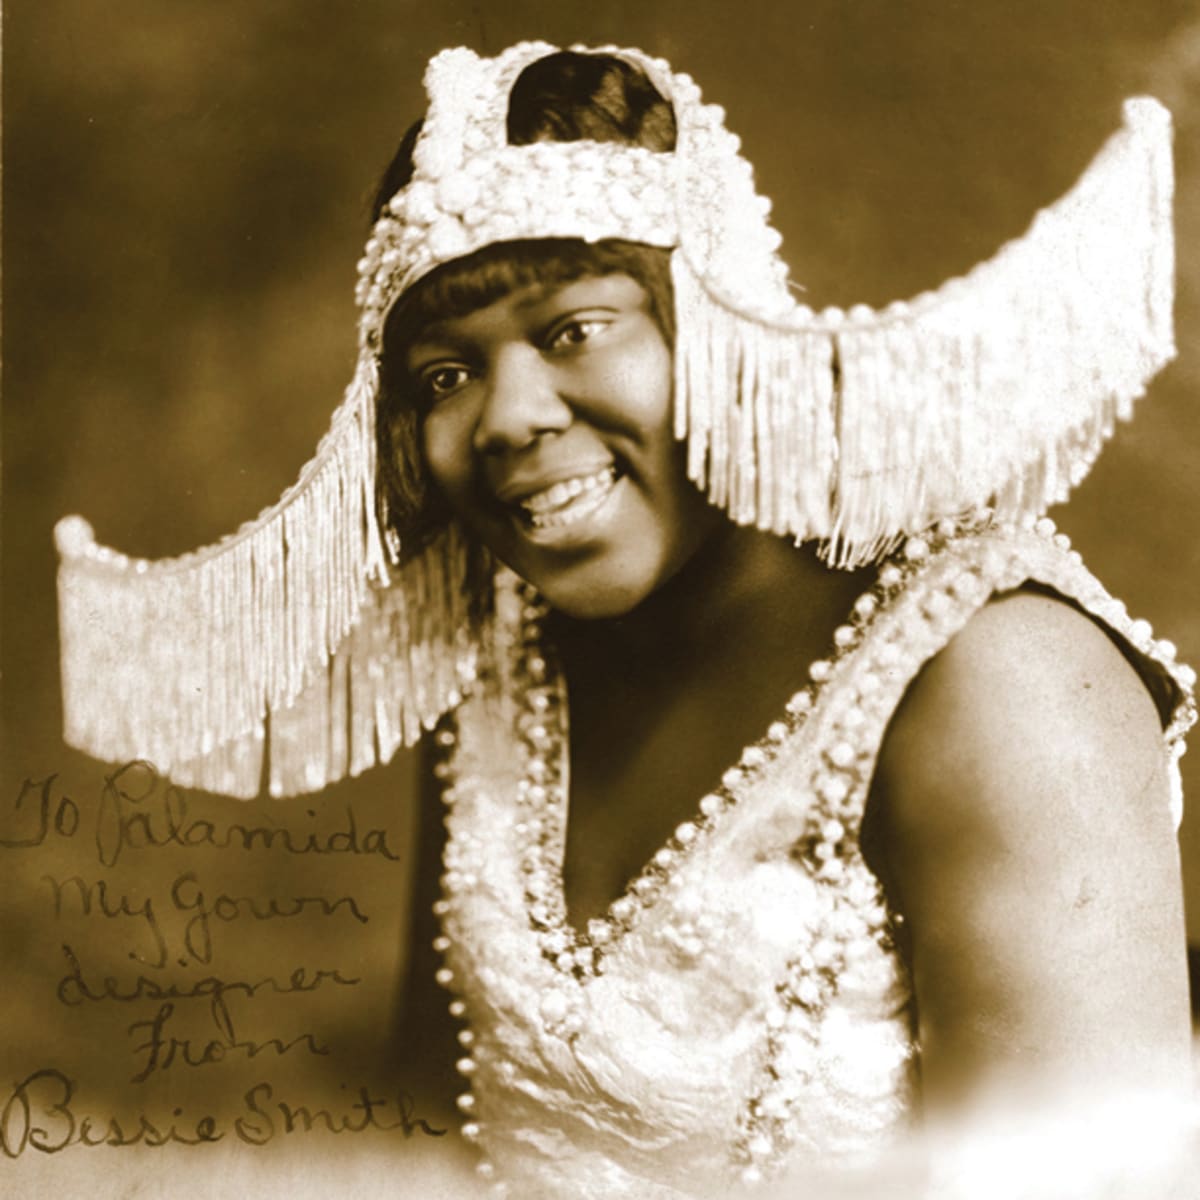 Bessie Smith's voice out loud and on Columbia 14527 - Goldmine Magazine: Record Collector & Music Memorabilia